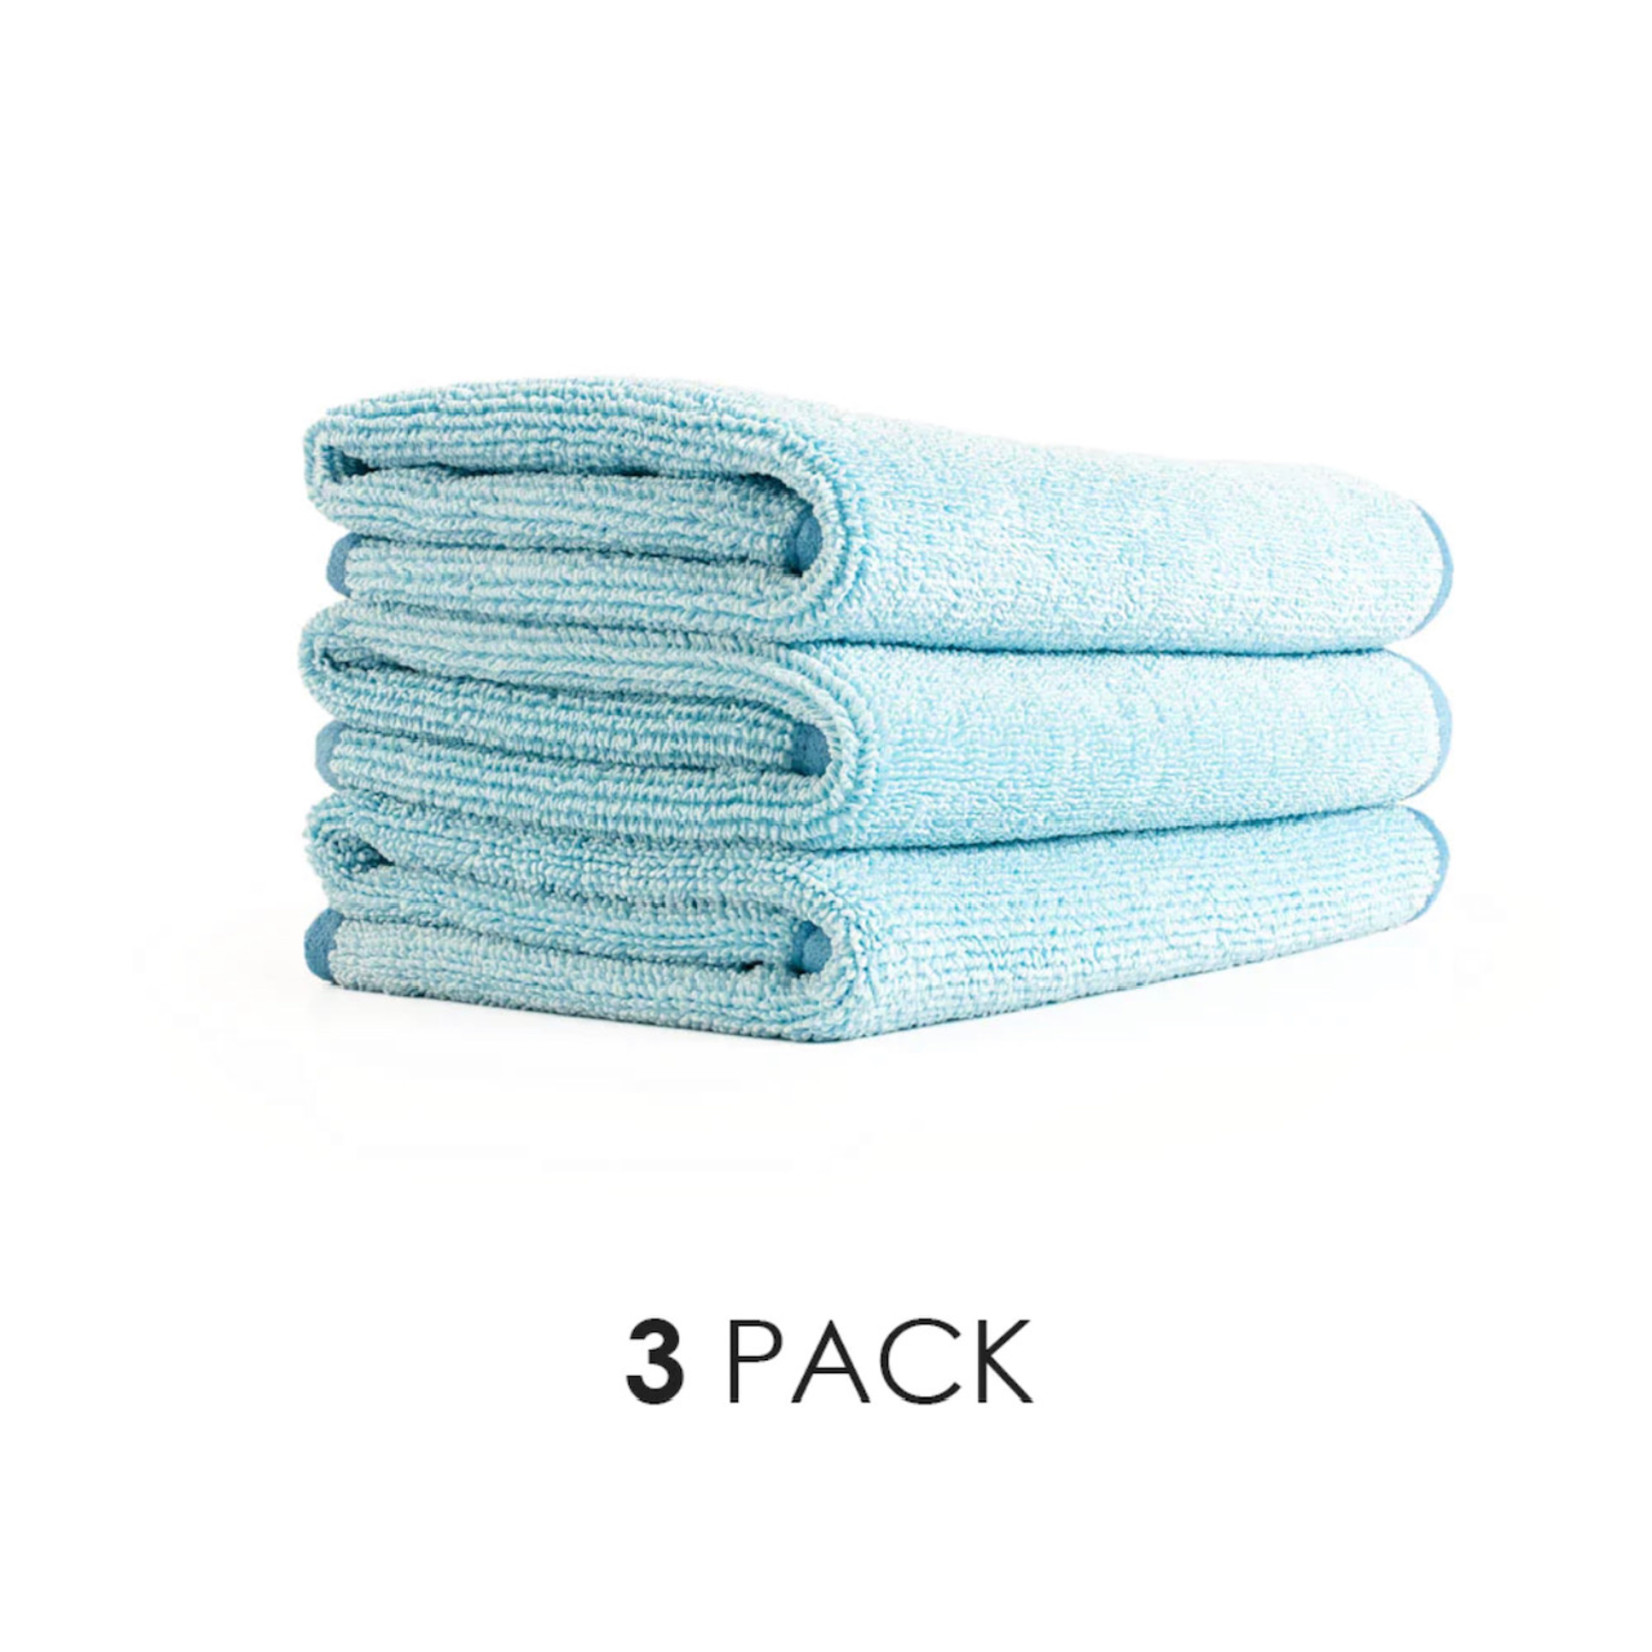 The Rag Company Premium FTW Twisted Loop Glass Towel 3-PACK (BLUE)